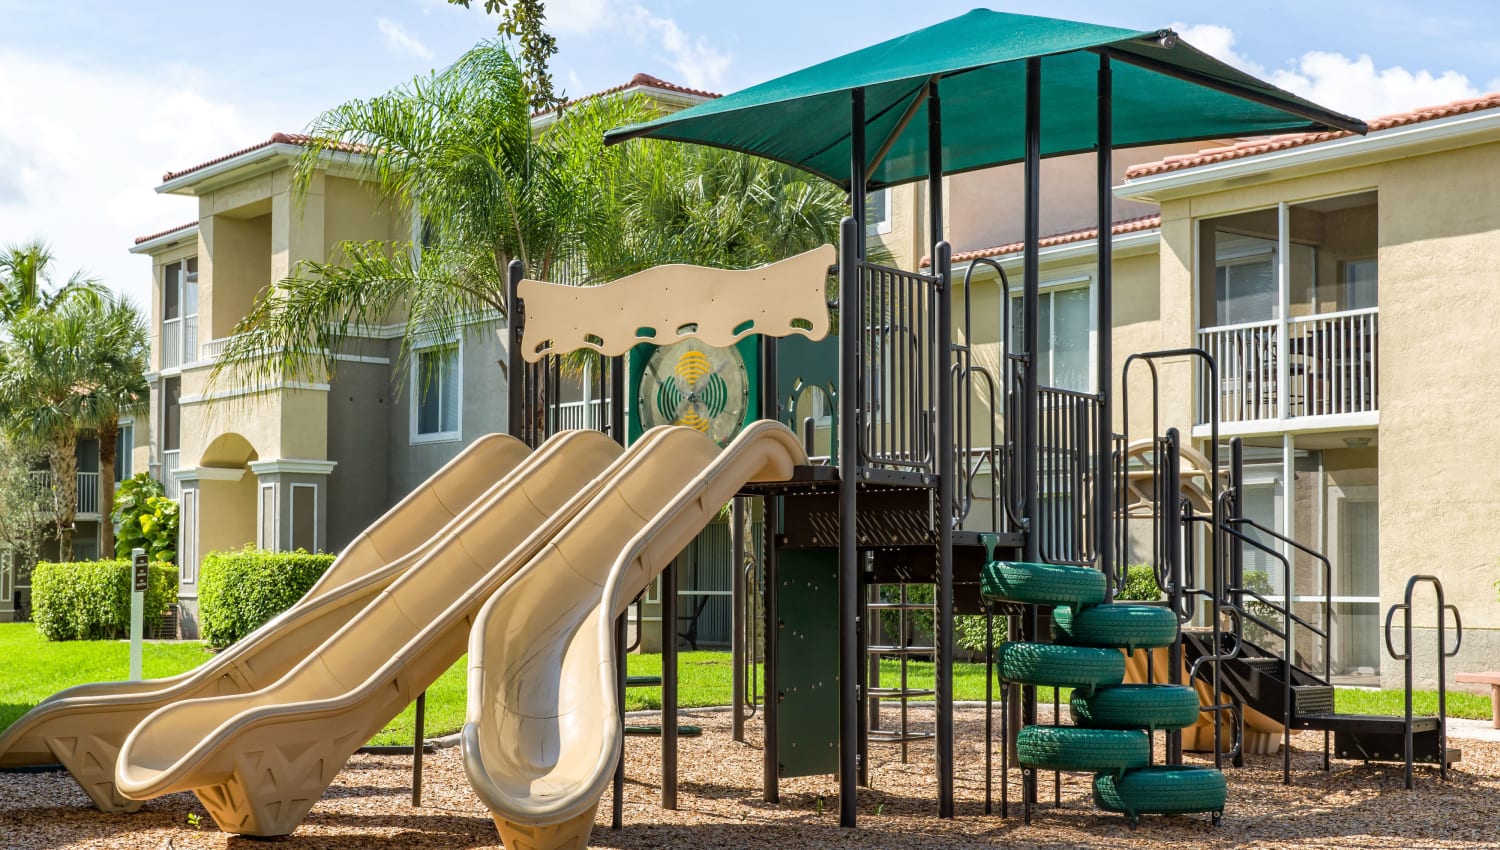 Playground at Ibis Reserve Apartments in West Palm Beach, Florida